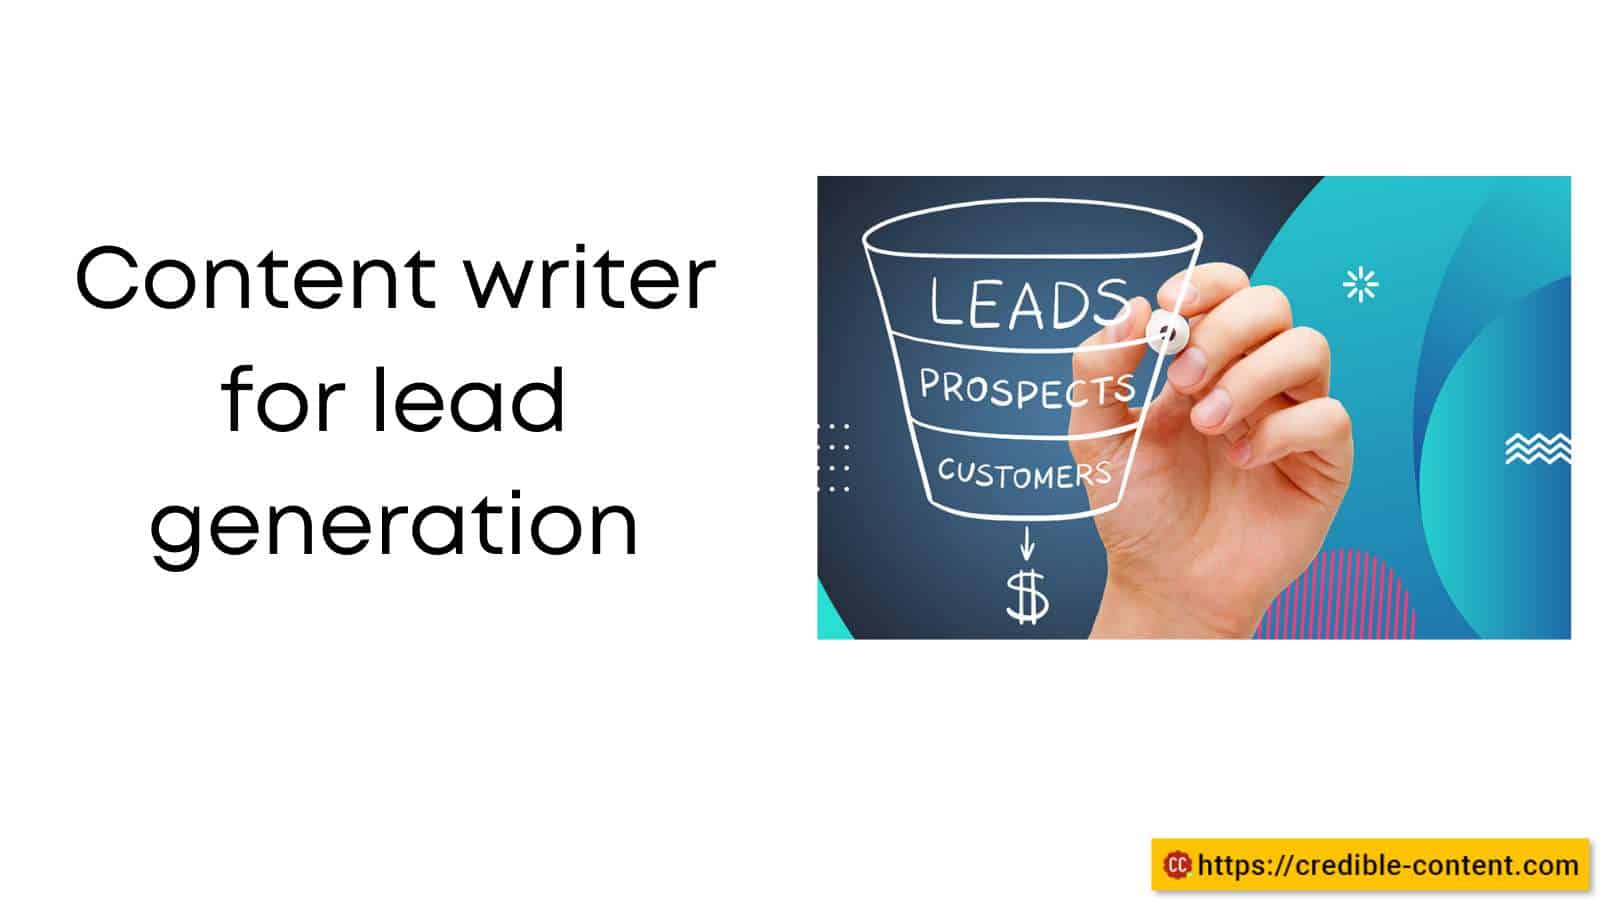 Content writer for lead generation